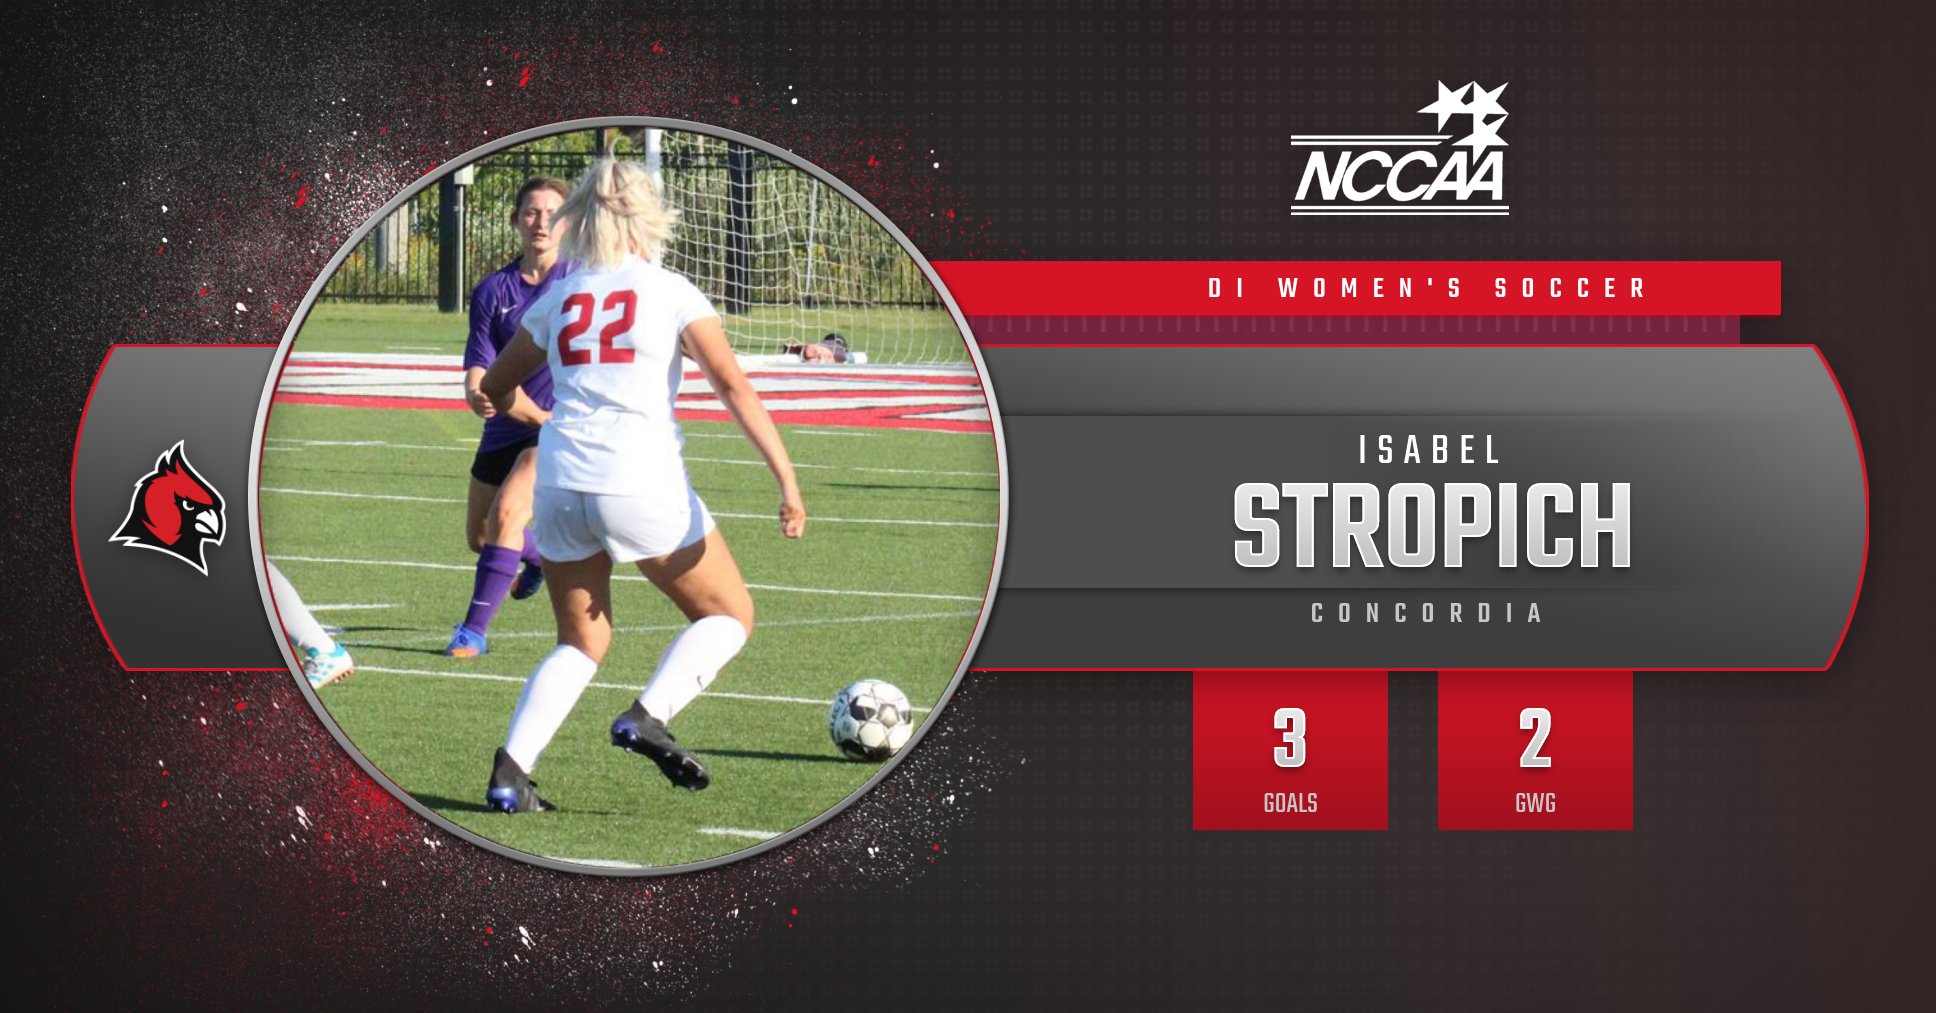 Isabel Stropich named NCCAA Offensive Player of the Week